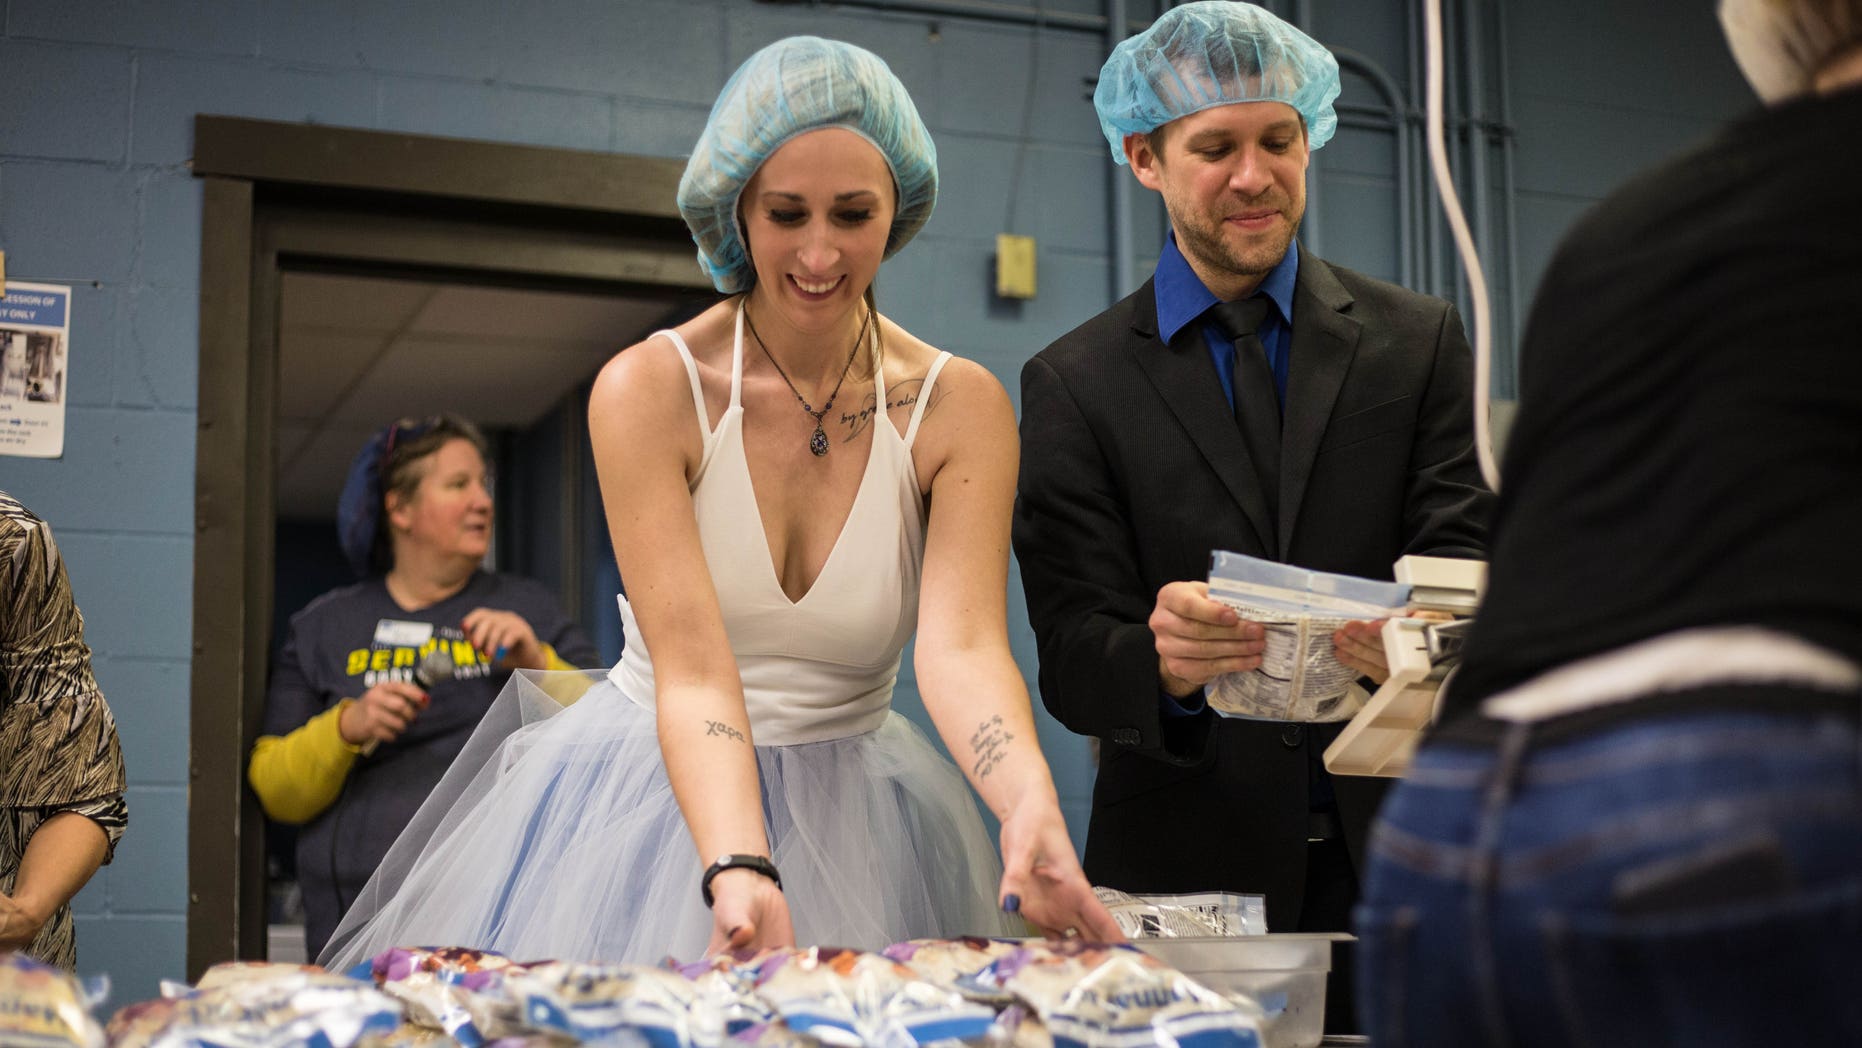 Minnesota couple prepares meals for hungry children after wedding: report